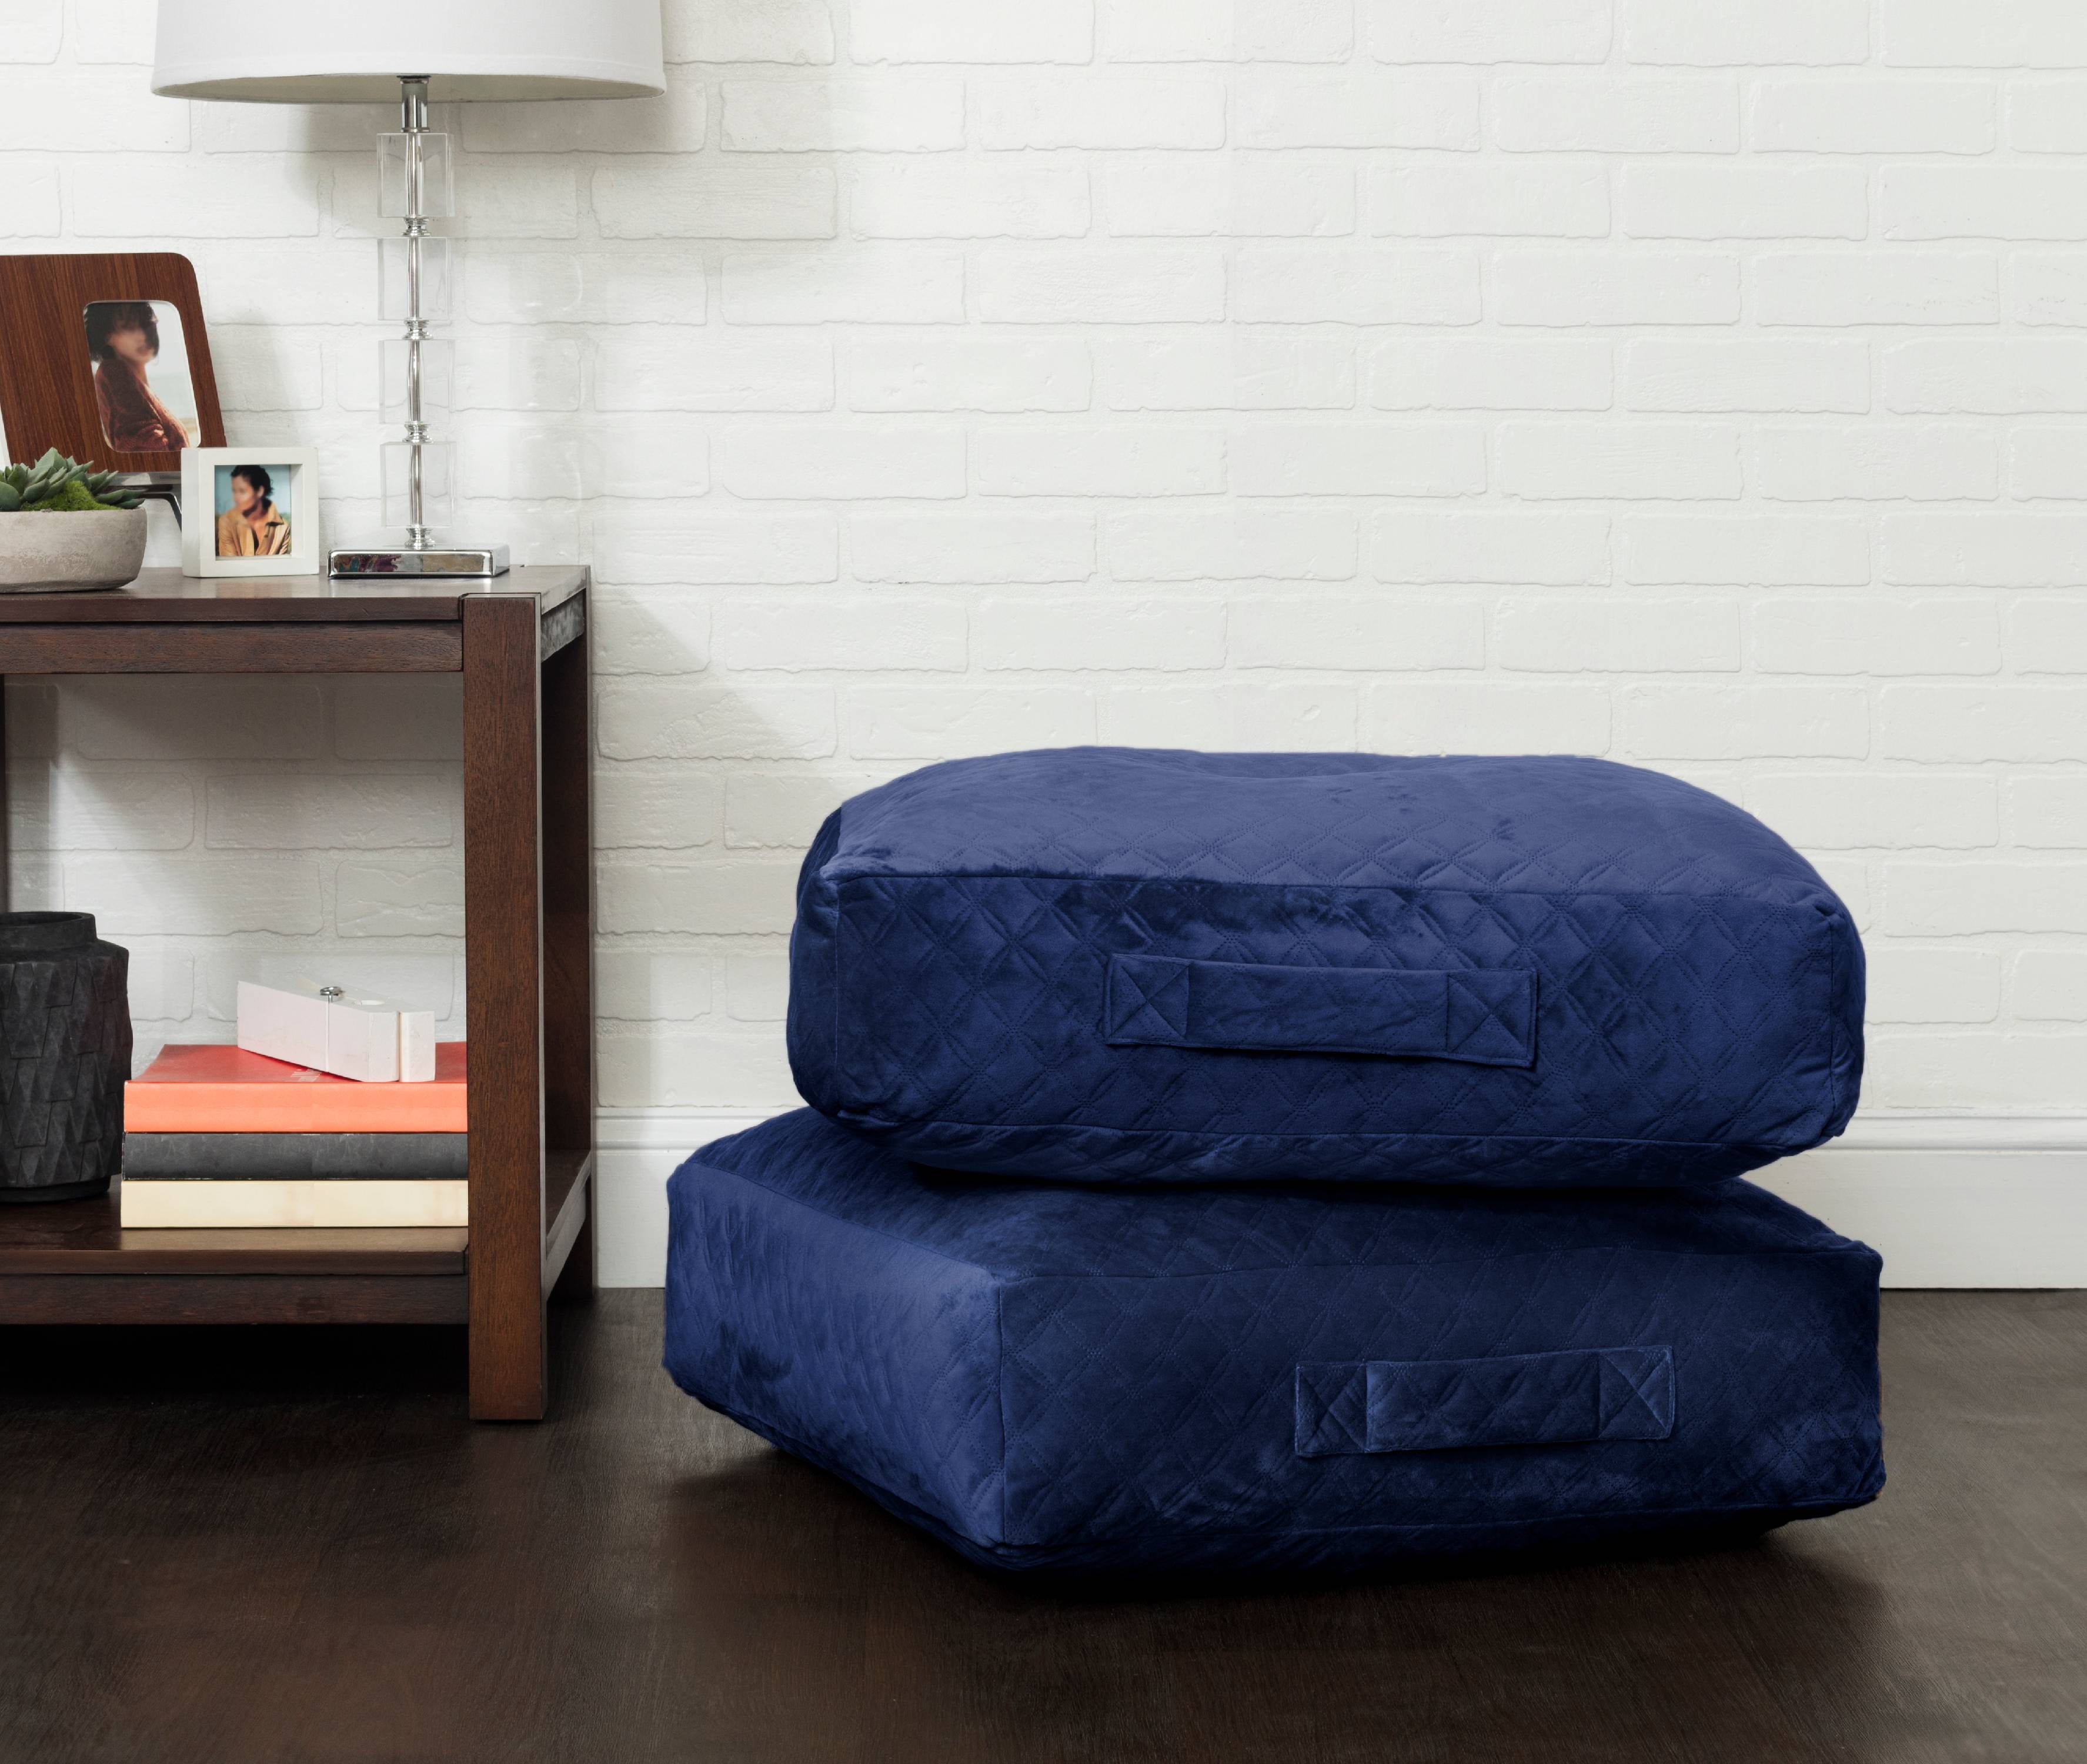 oversized floor pillows for seating